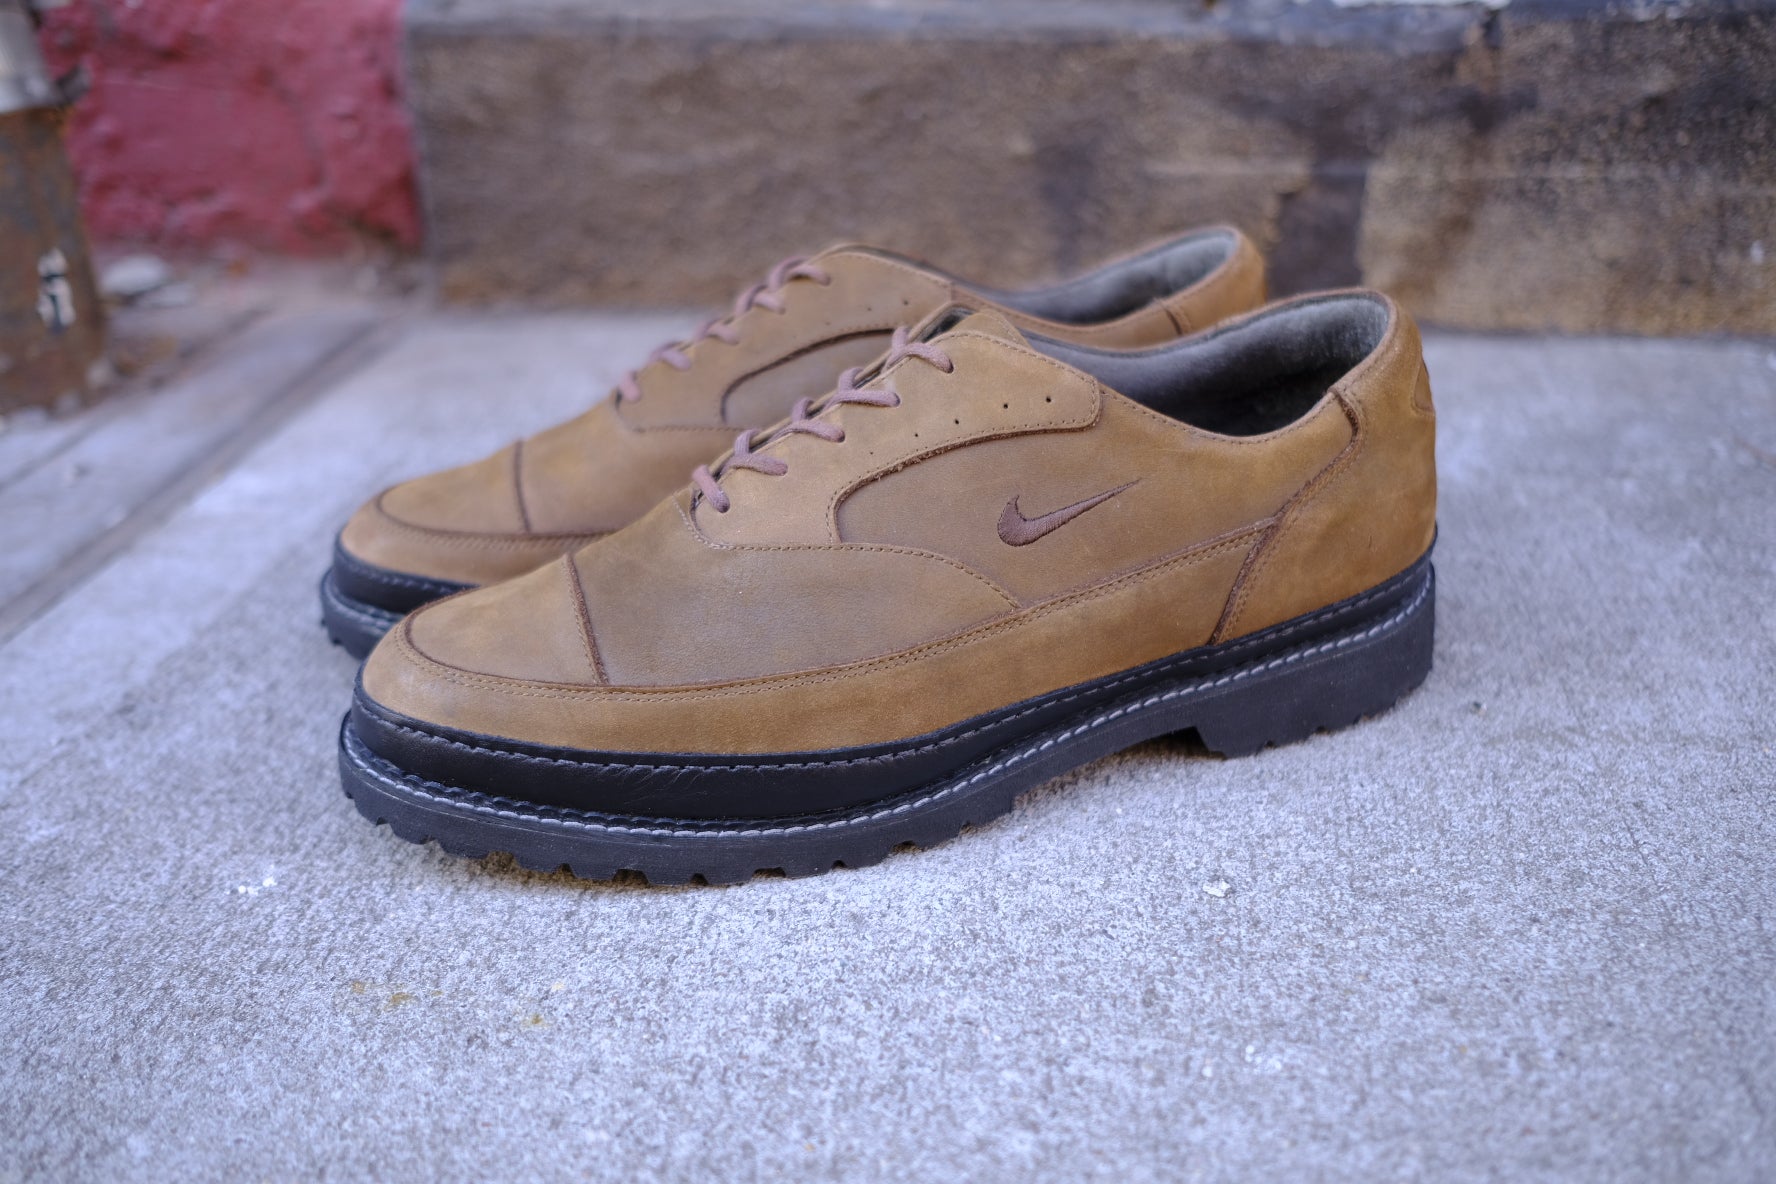 reconstructed 1994 nike golf shoe - m us 11.5